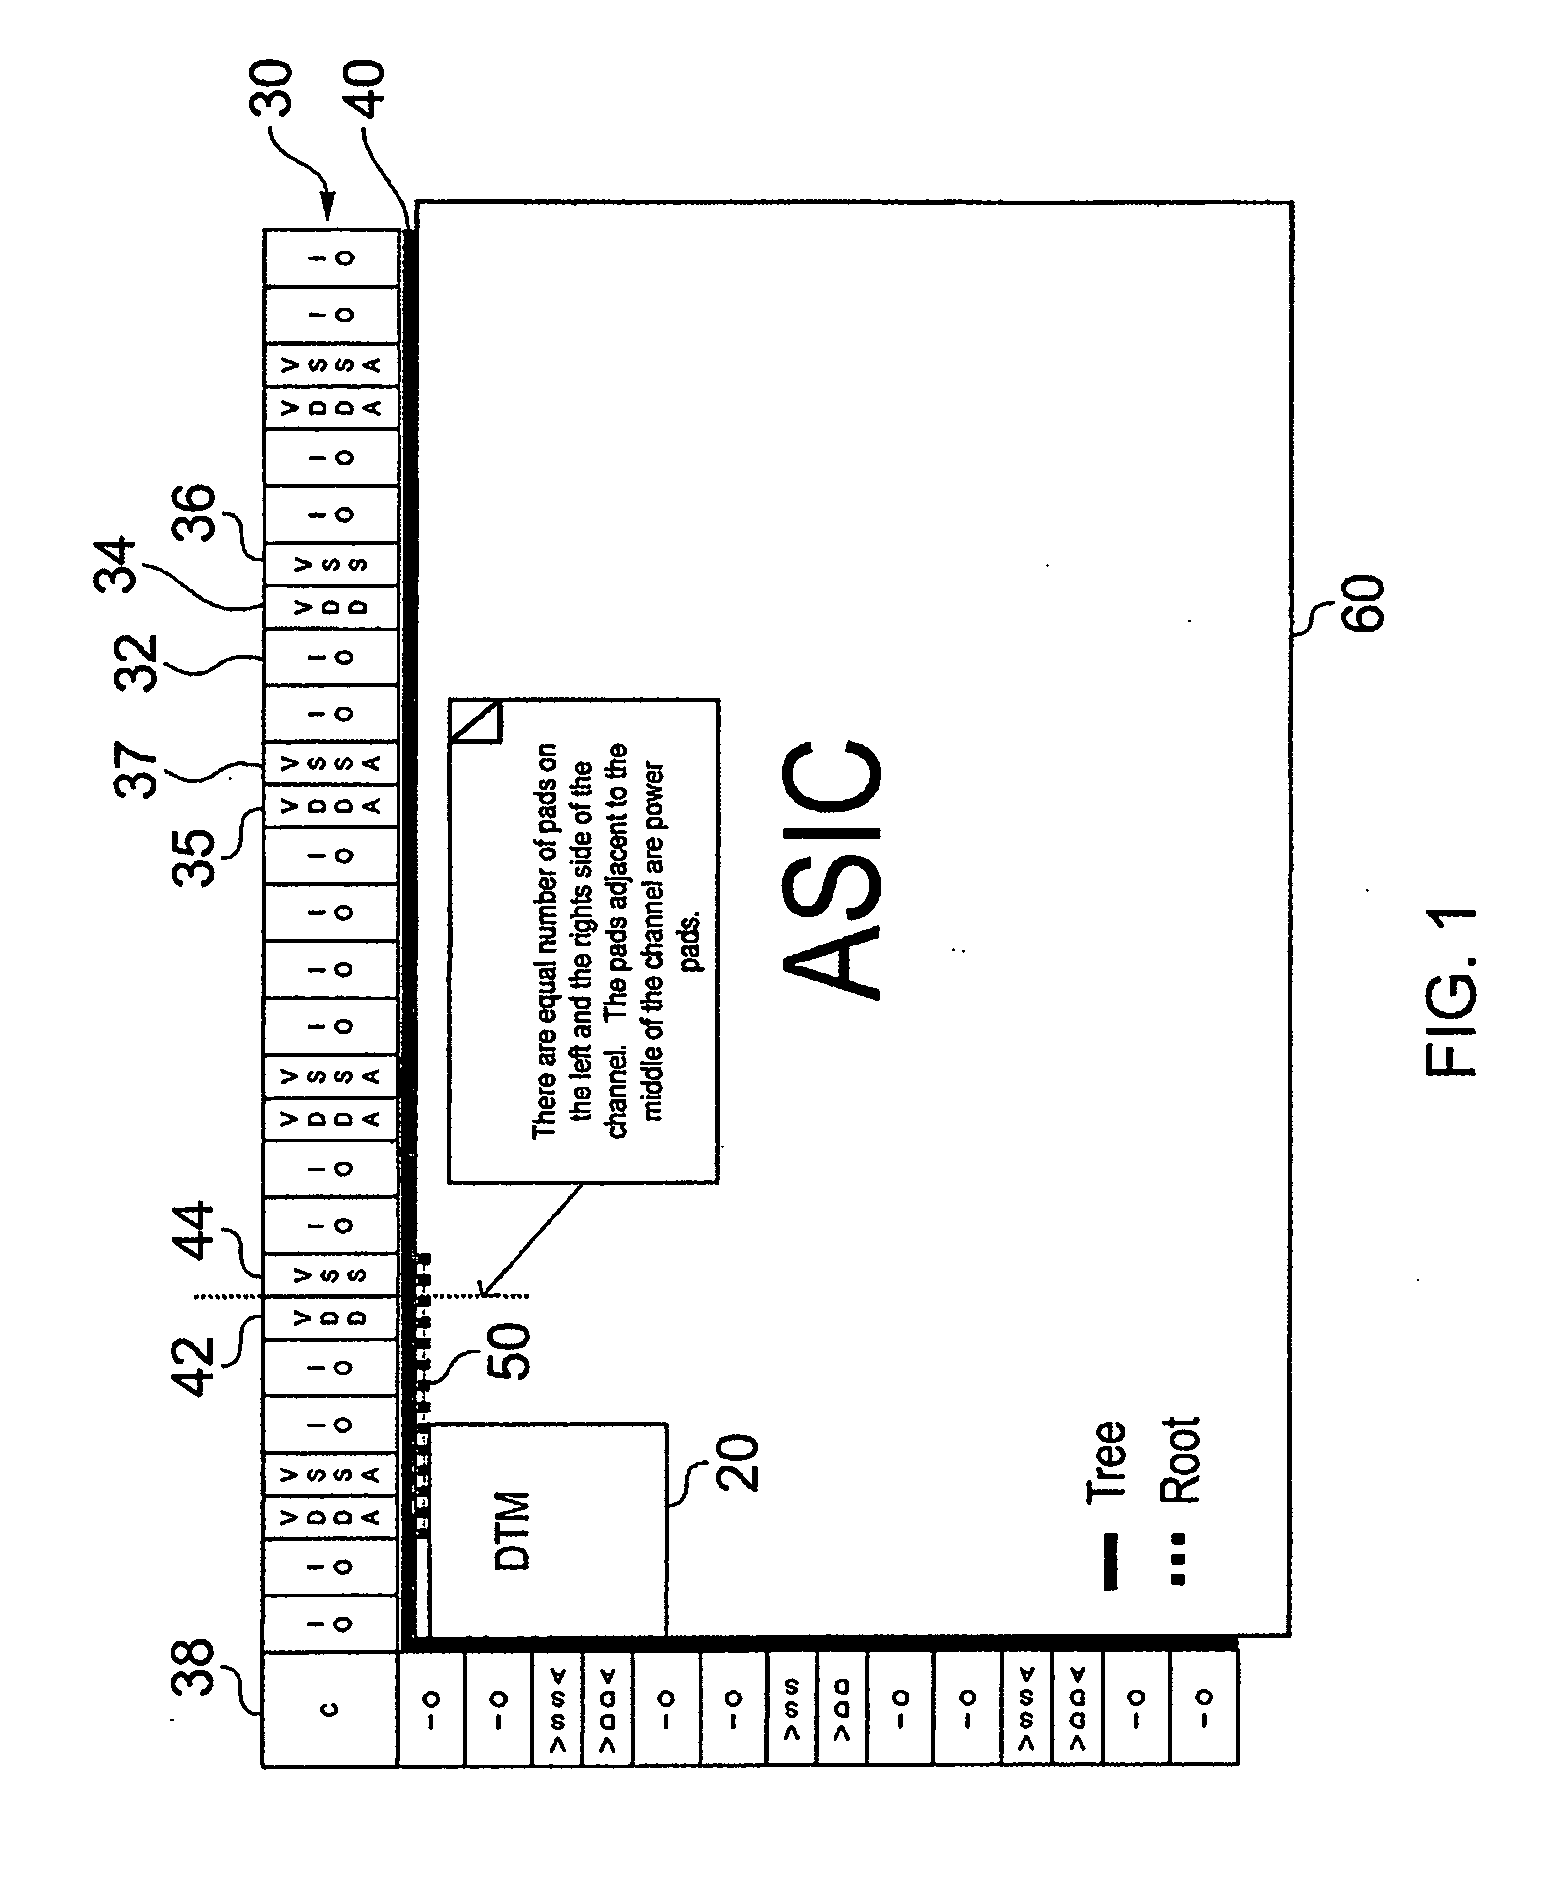 Method, system and computer program product for determining routing of data paths in interconnect circuitry